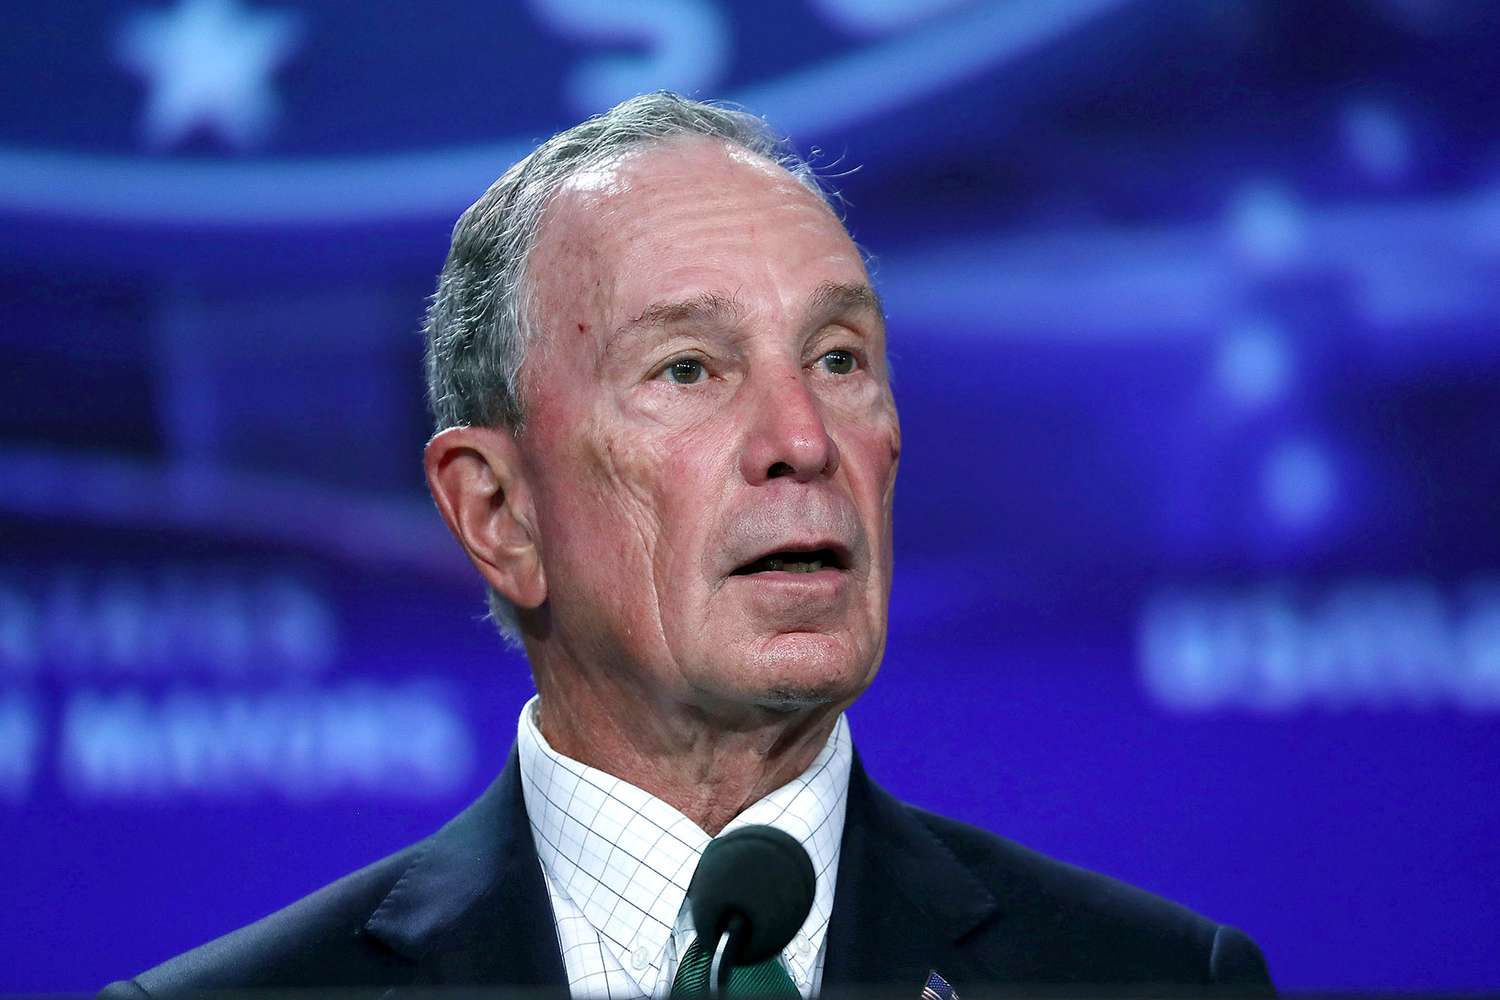 Michael Bloomberg Addresses U.S. Conference Of Mayors